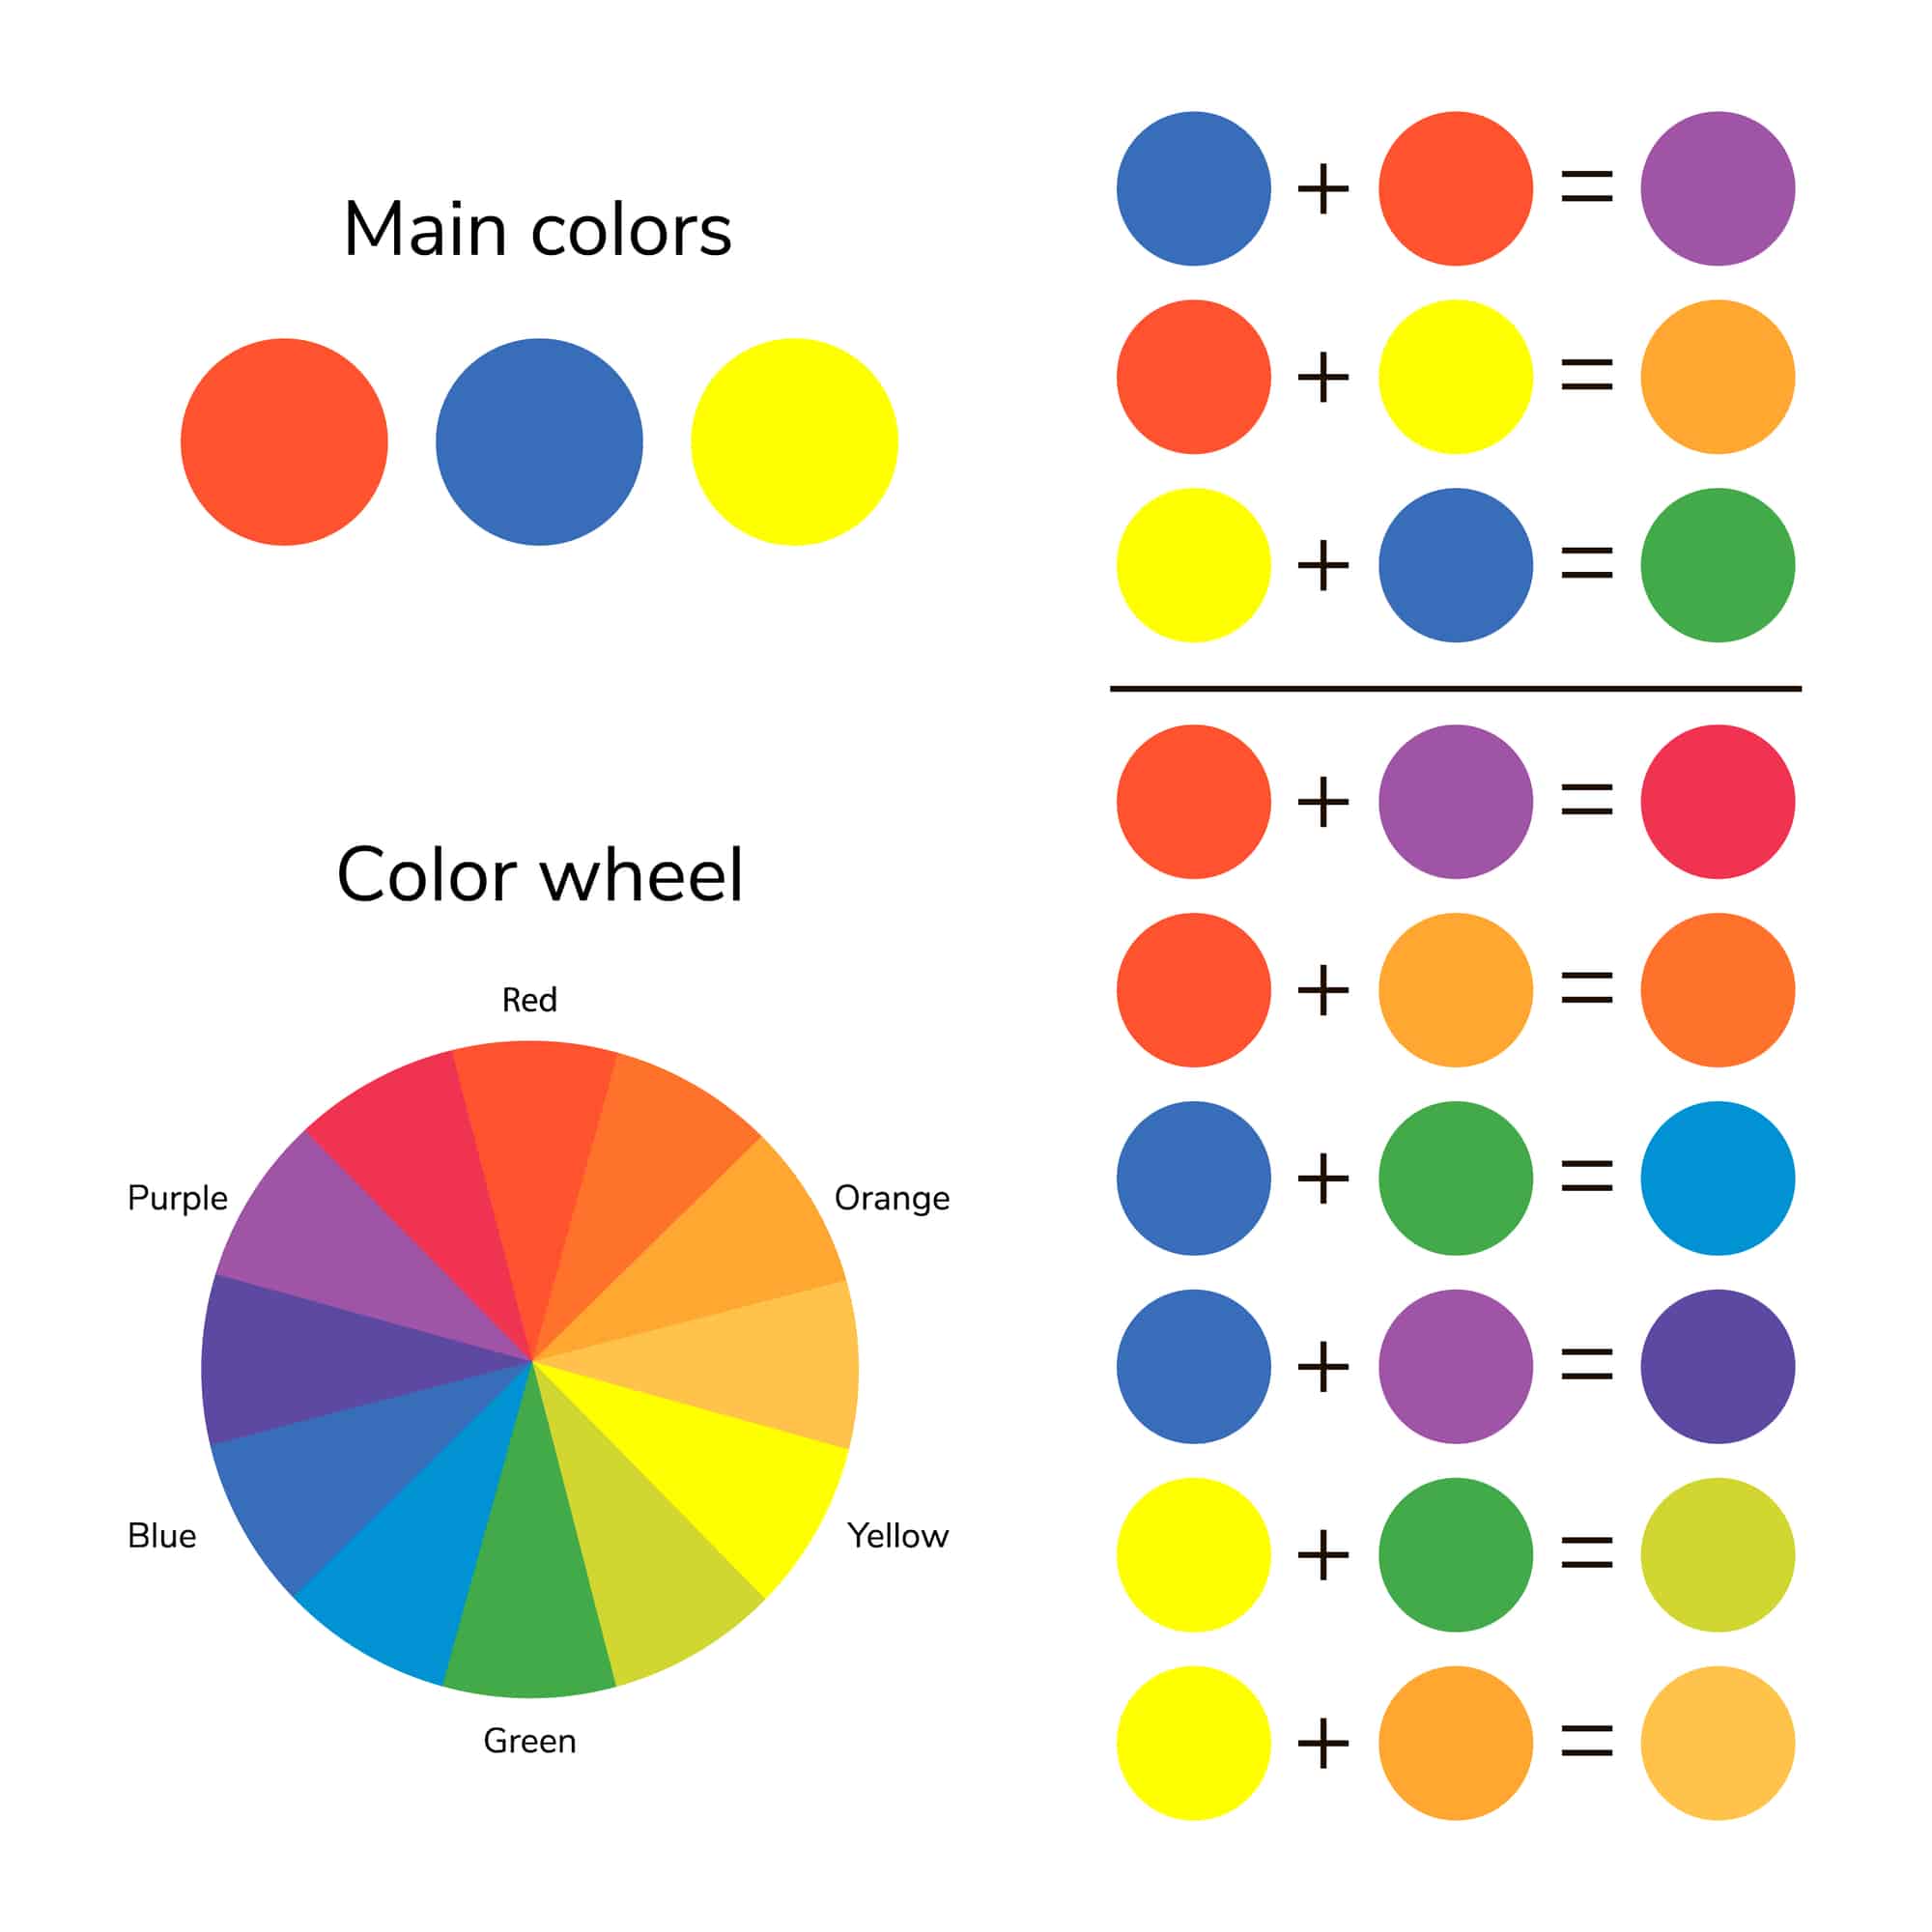 What is the difference between Blue ,Yellow, Green and Pink